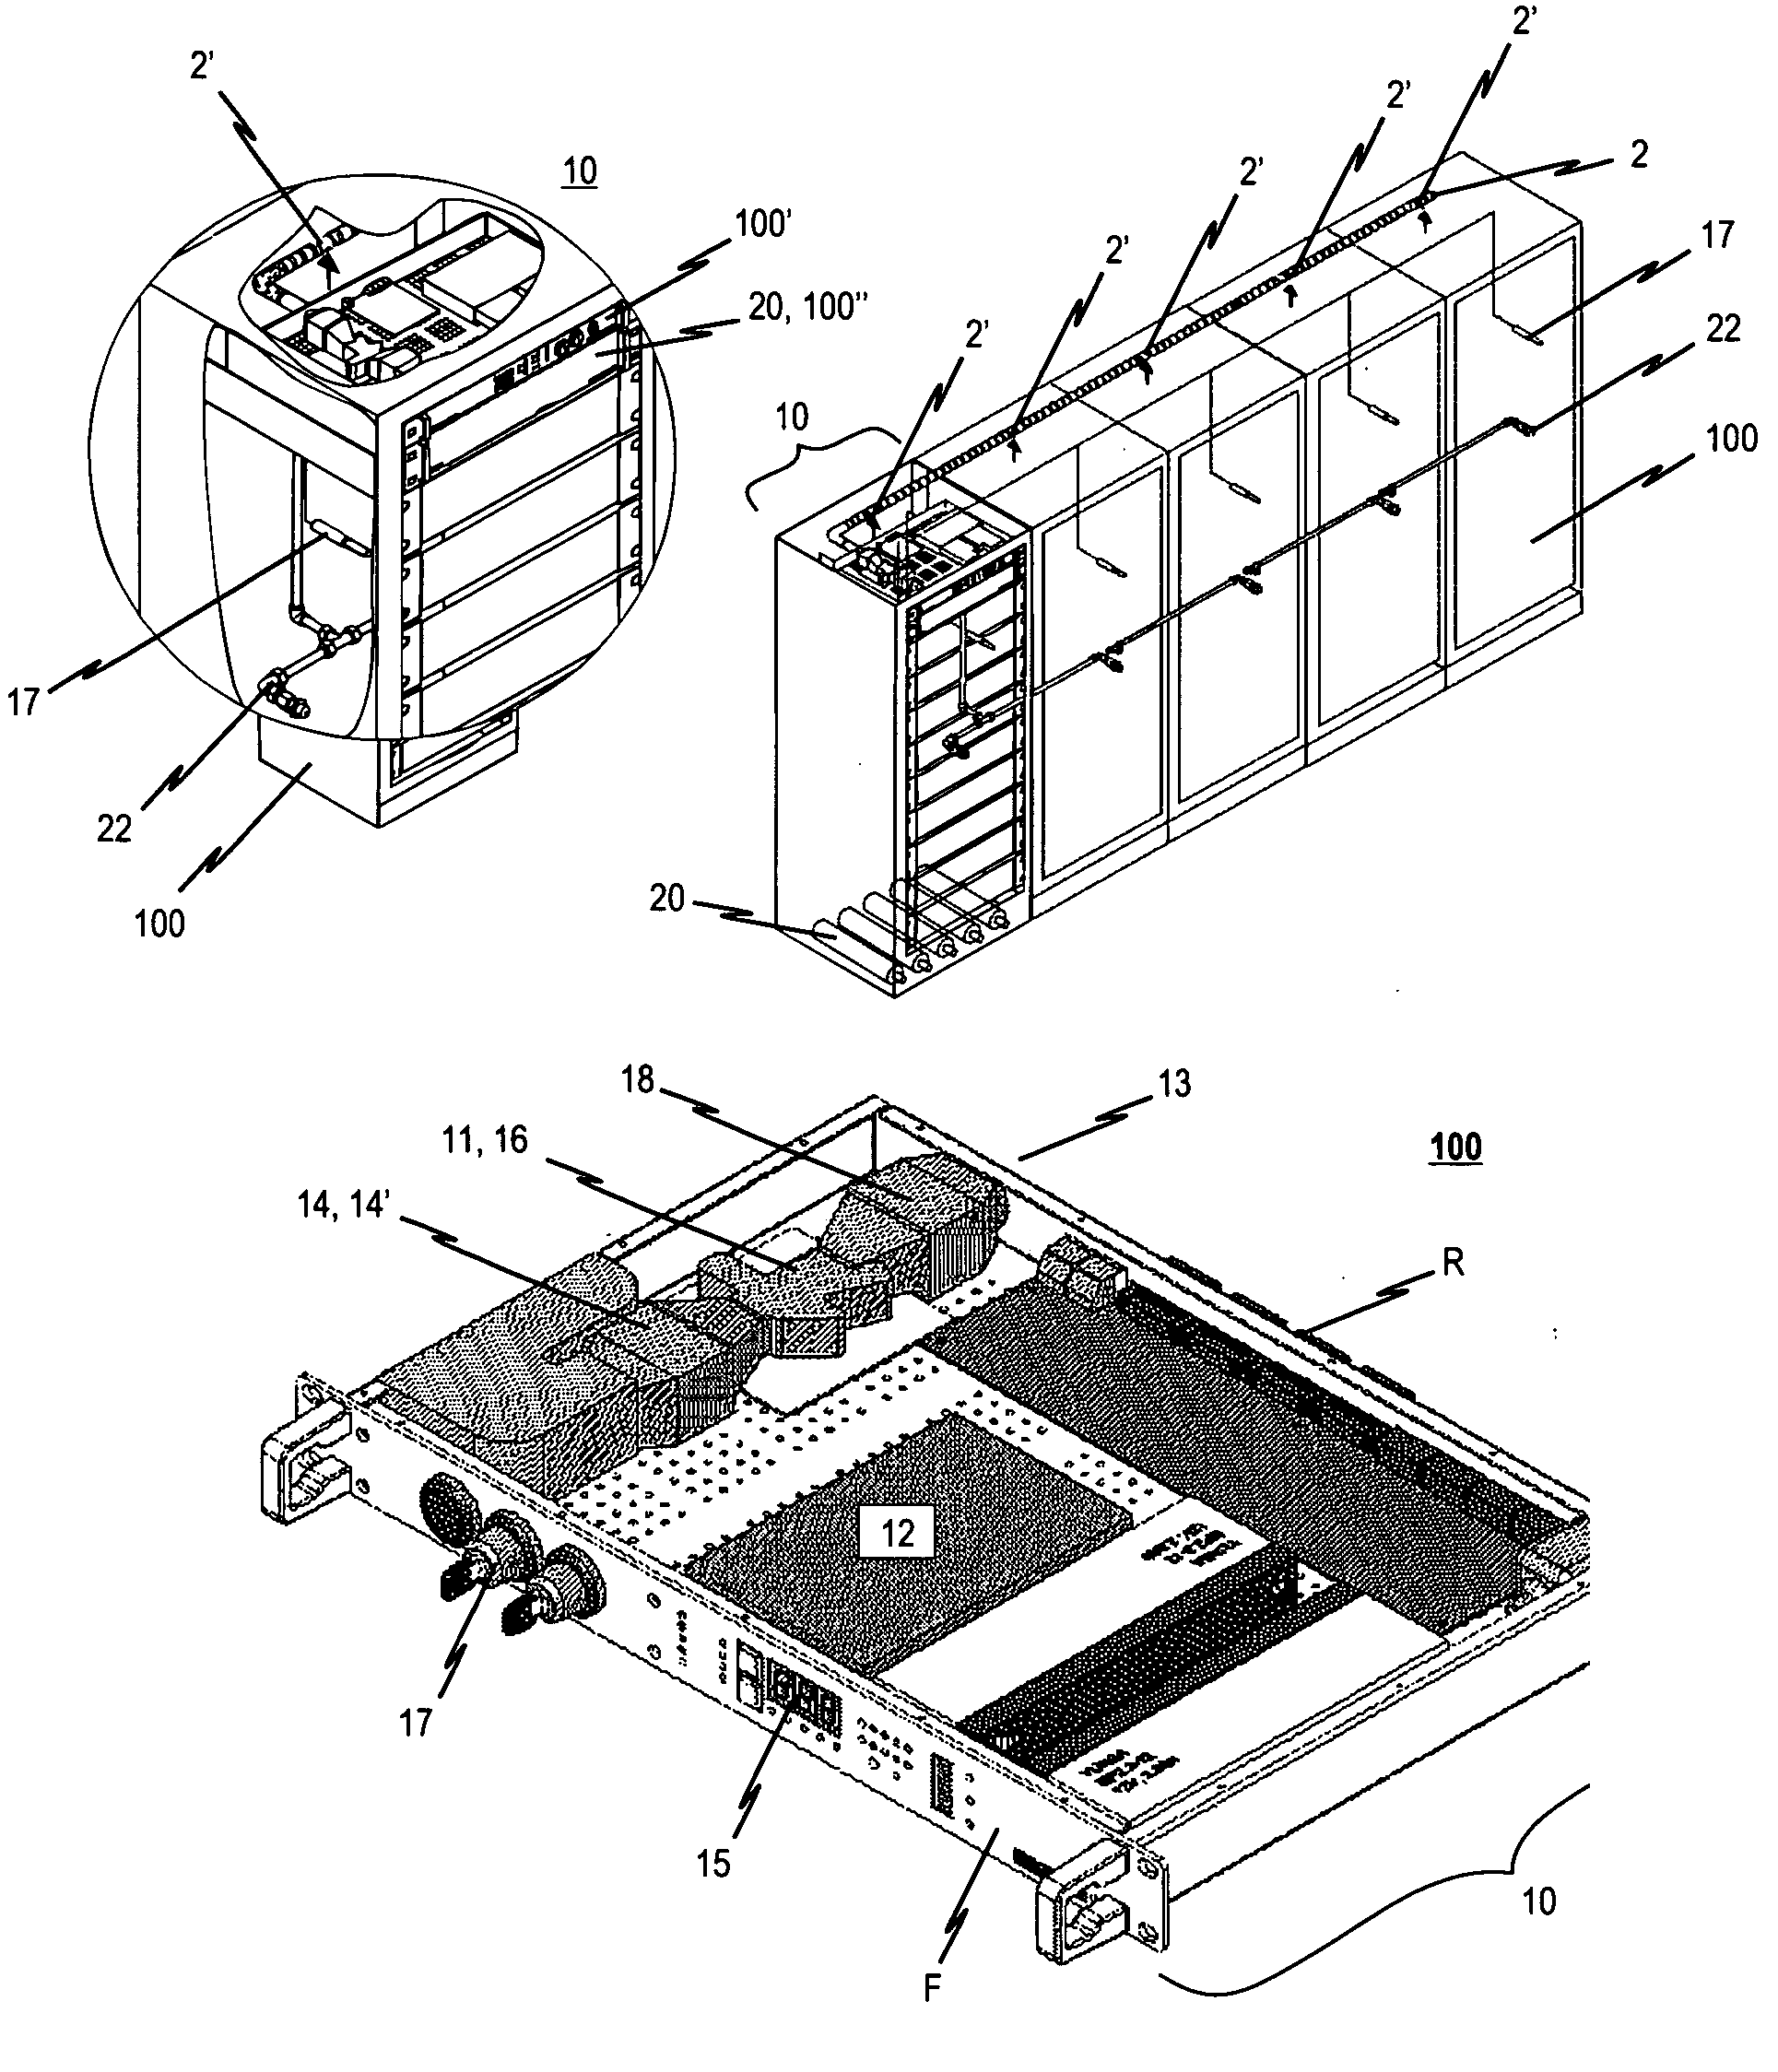 Apparatus for fire detection in an electrical equipment rack